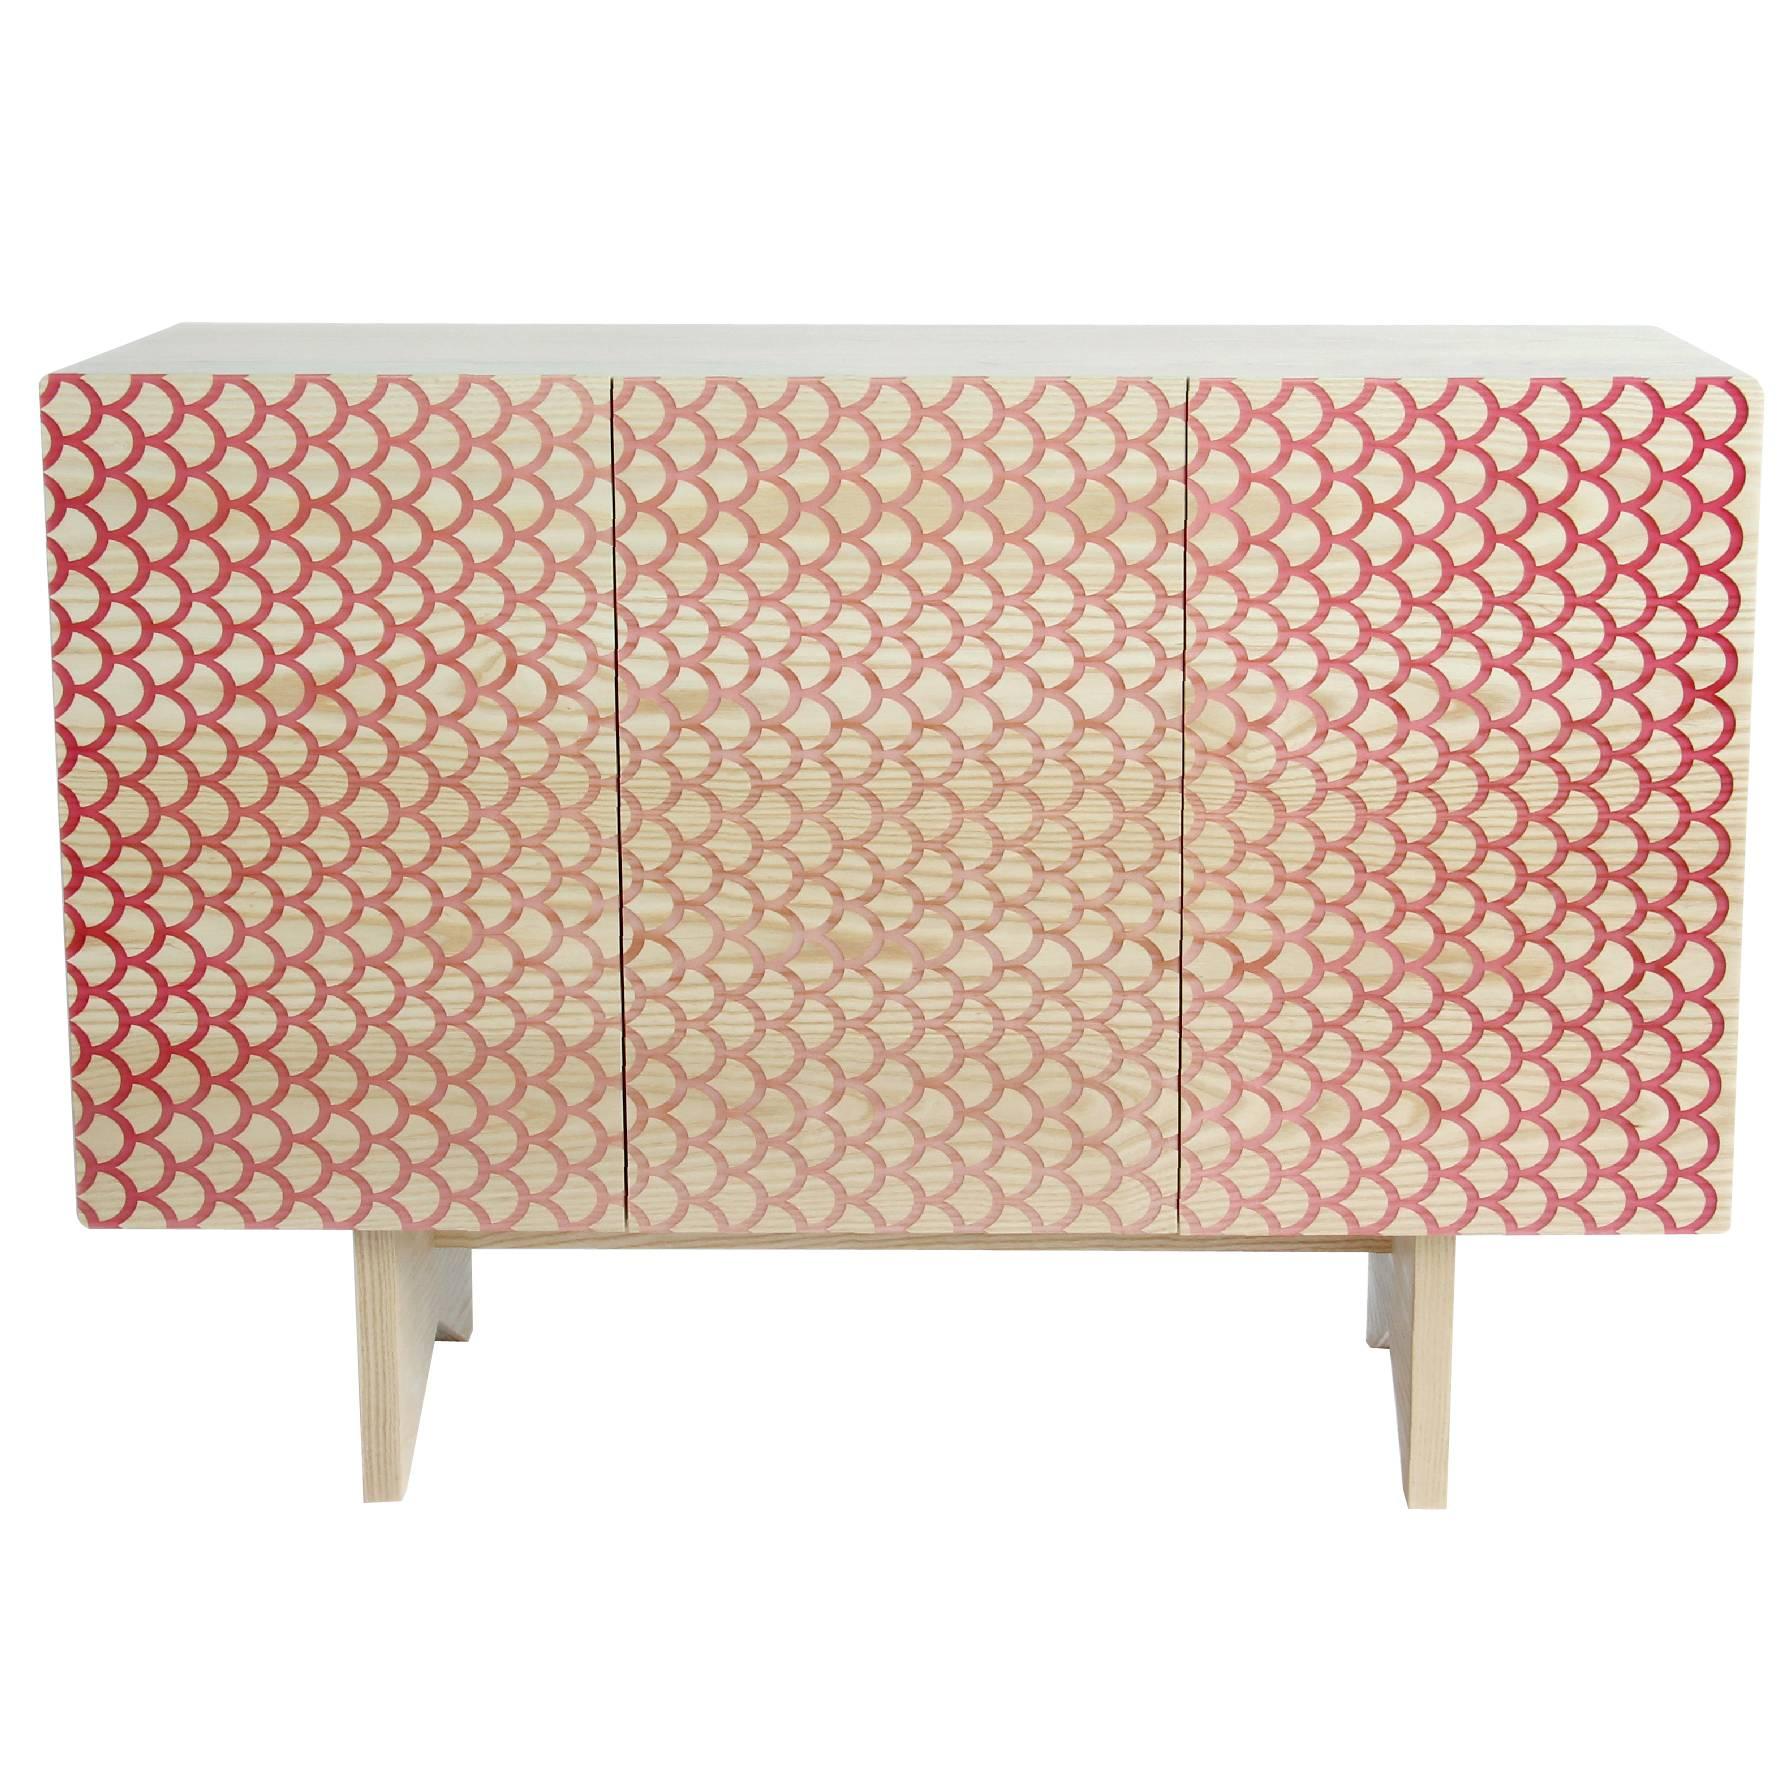 Custom Koi Credenza in Ash, Inlaid with Translucent Red Resin im Angebot